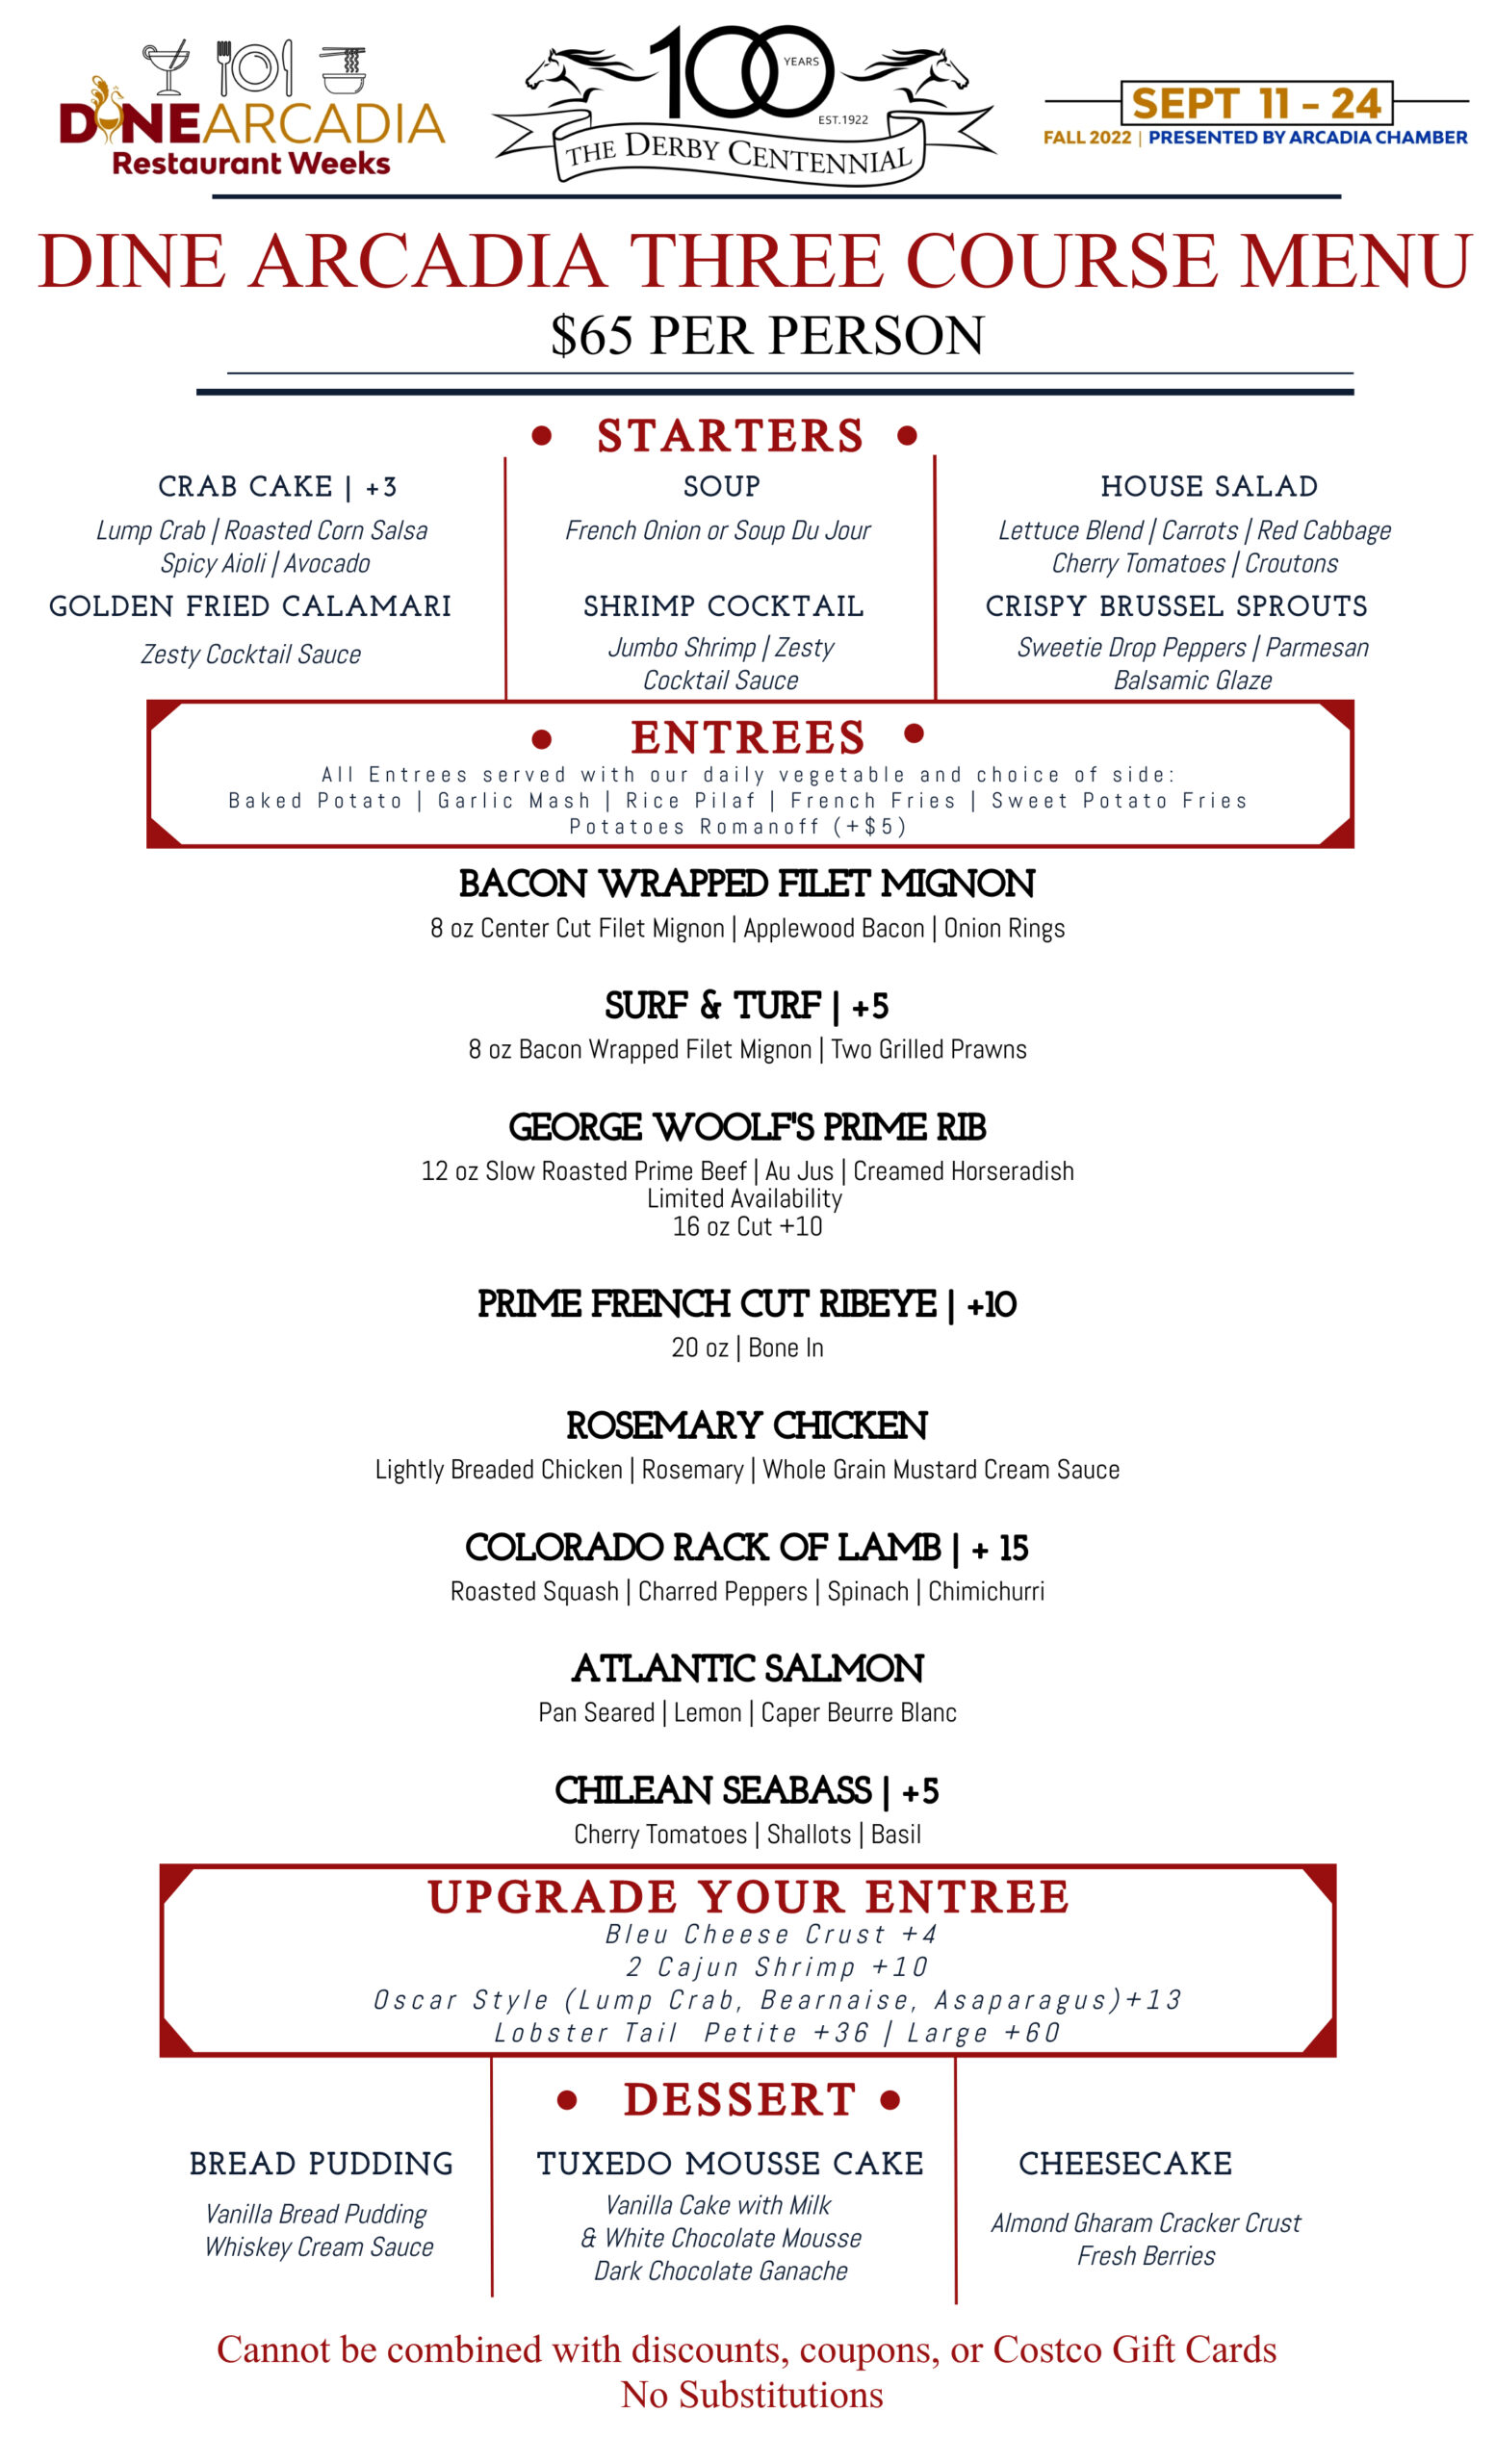 Dine Arcadia September menu for the Derby featuring three course meal